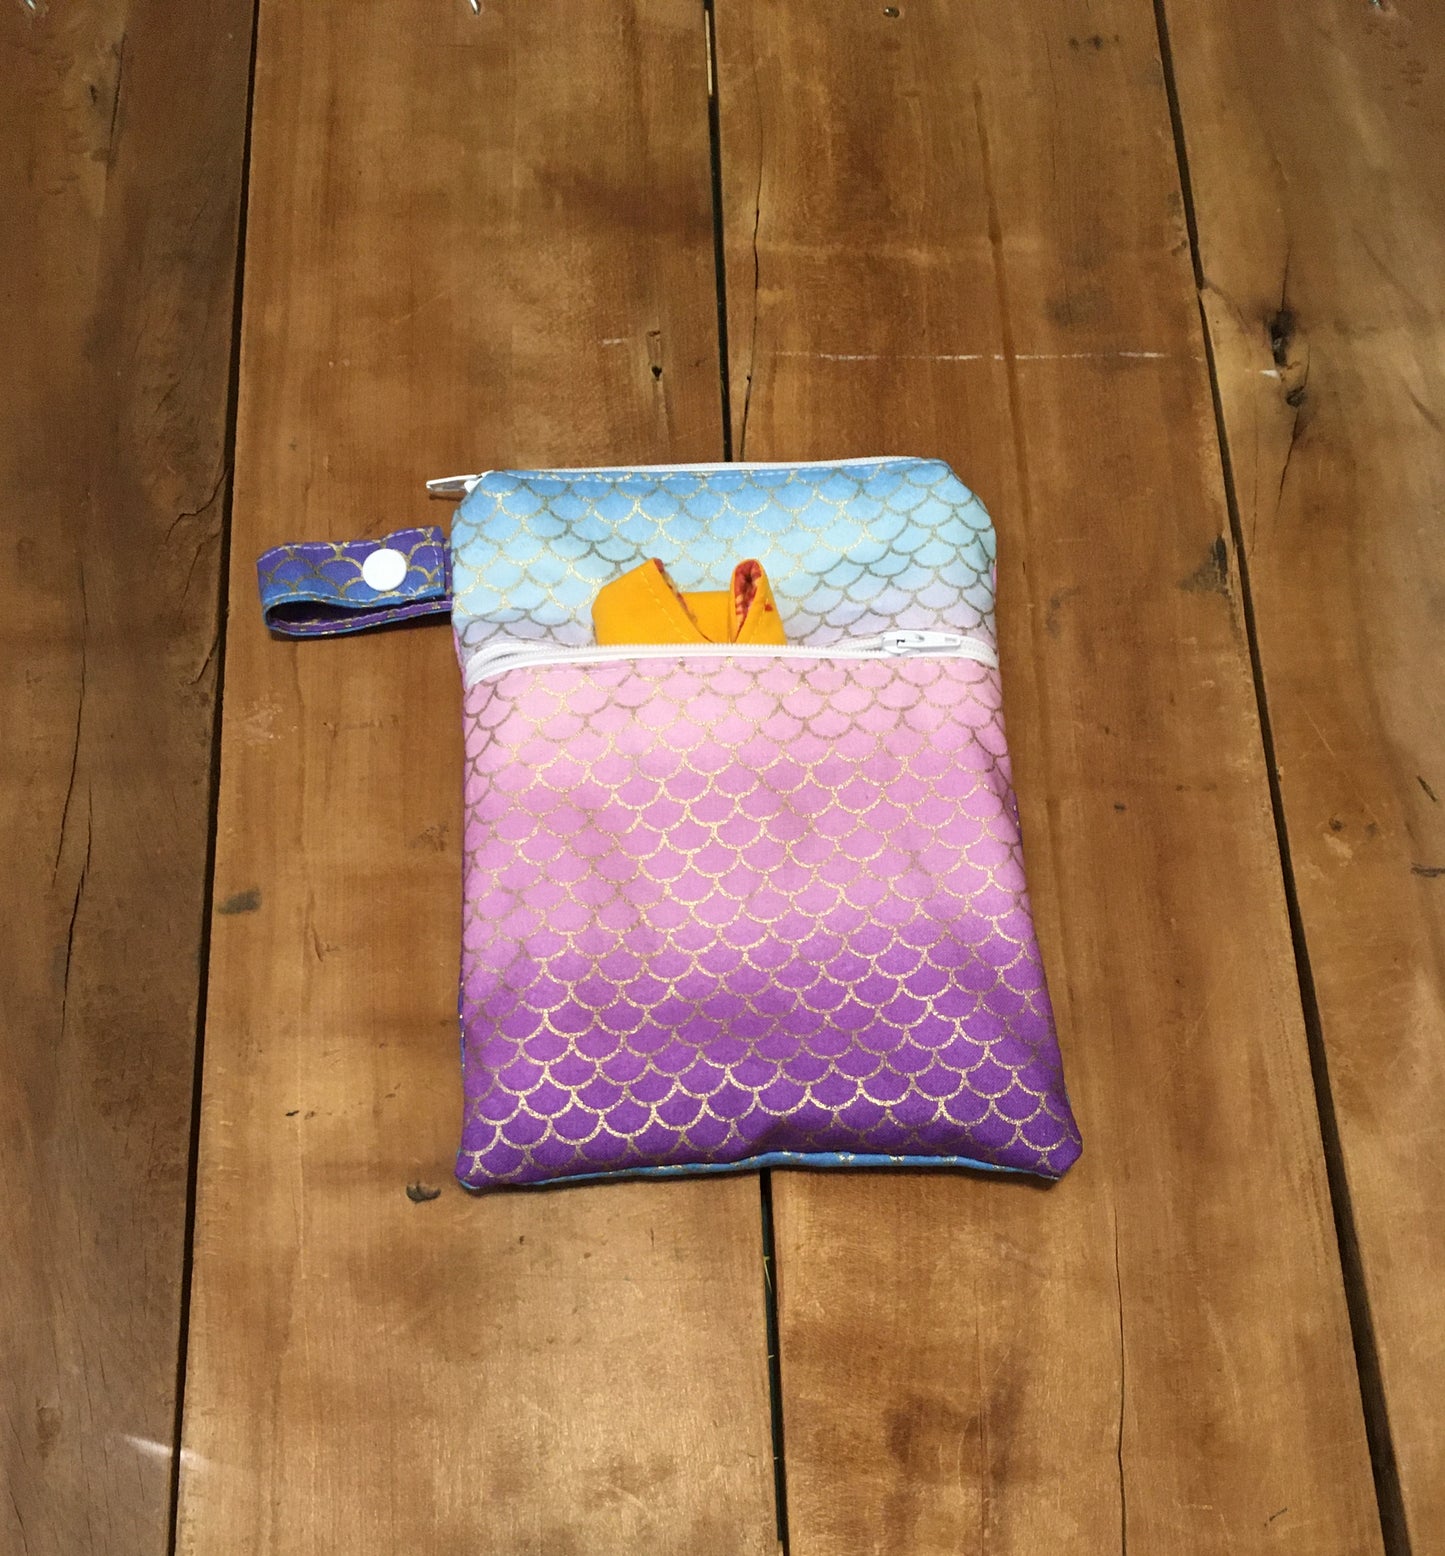 Ombre mermaid scales wet dry cloth pads bag - top pocket is the wet pocket and front pocket is the dry pocket